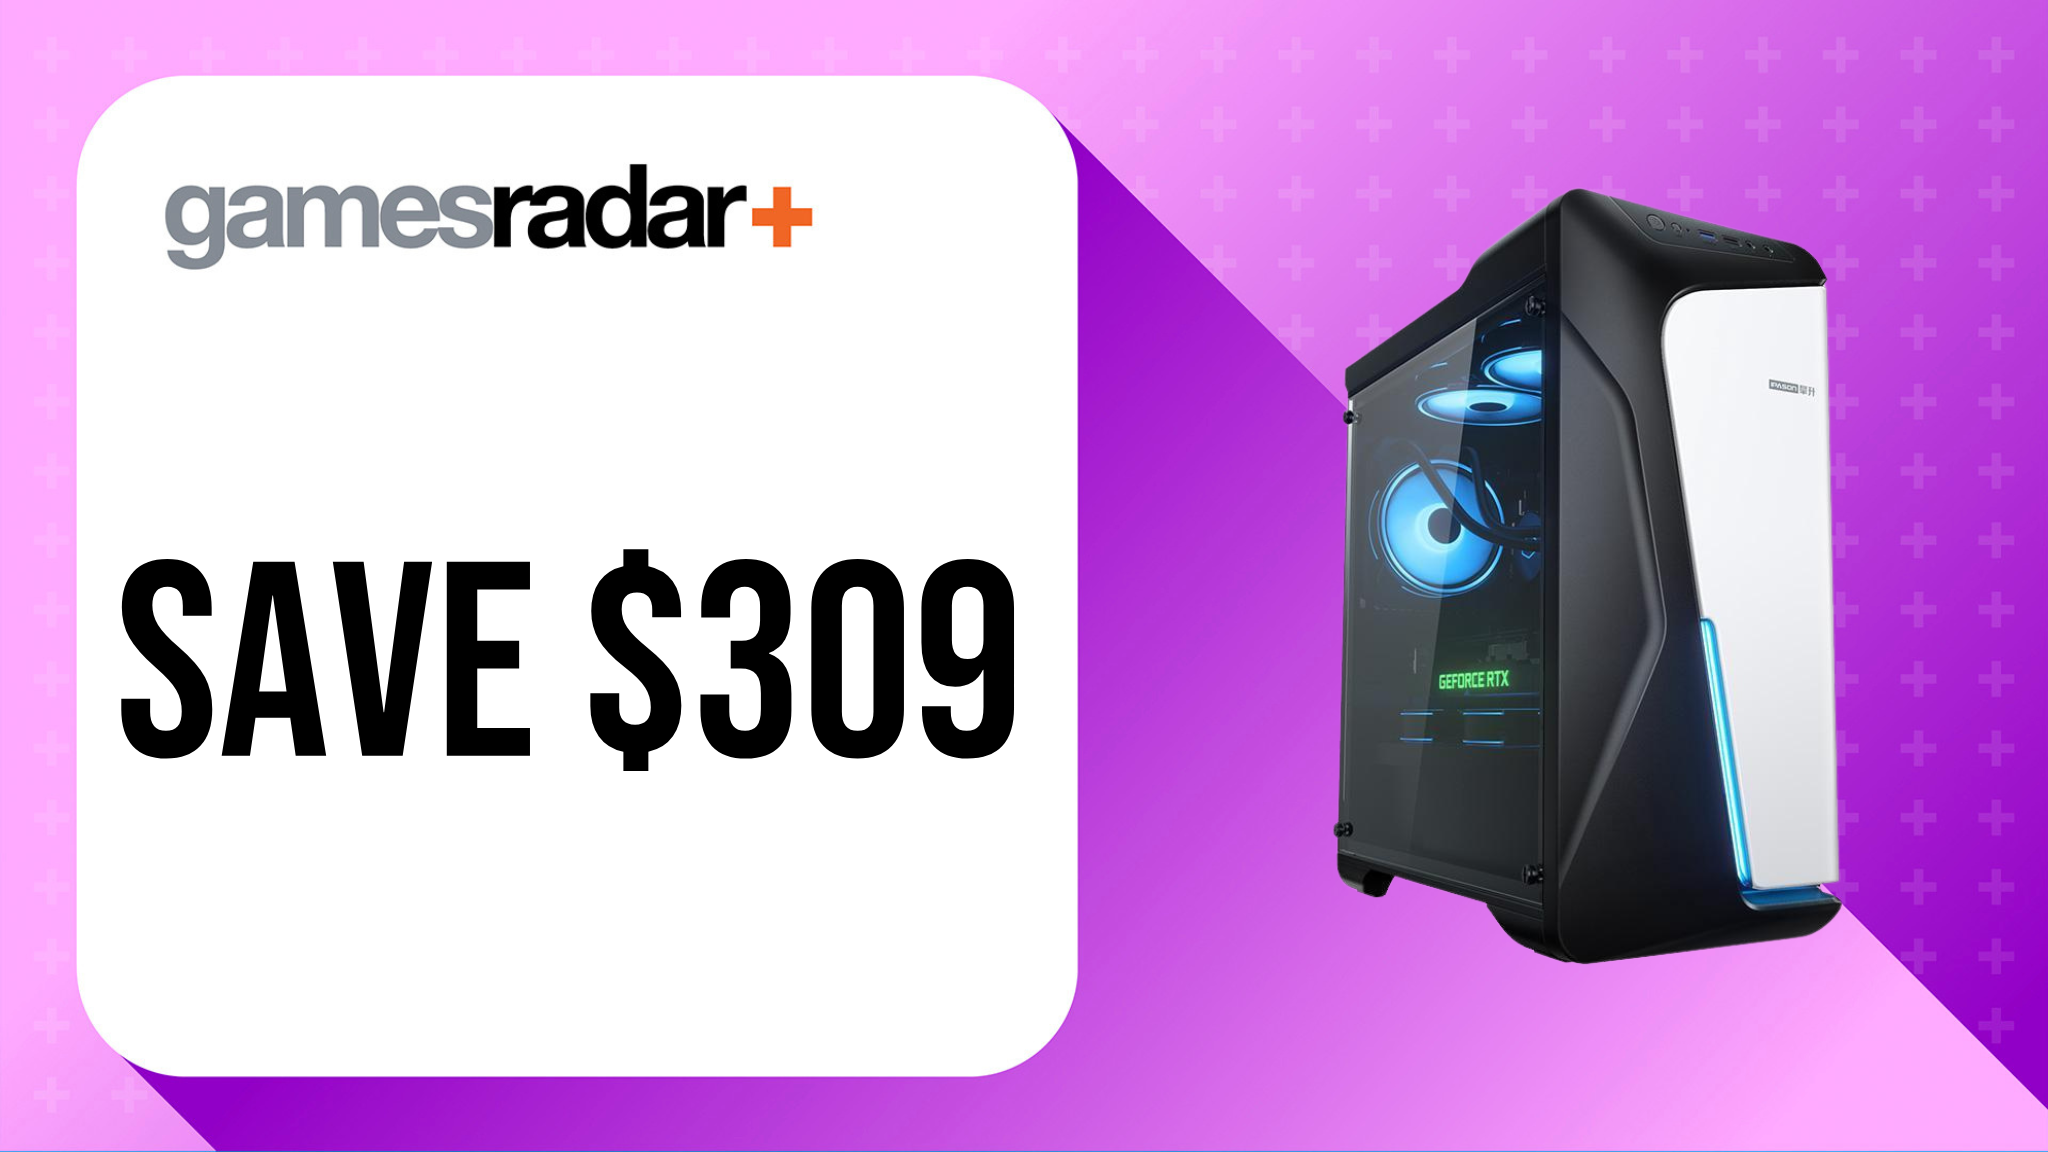 IPASON Gaming PC deal with $309 saving and purple background